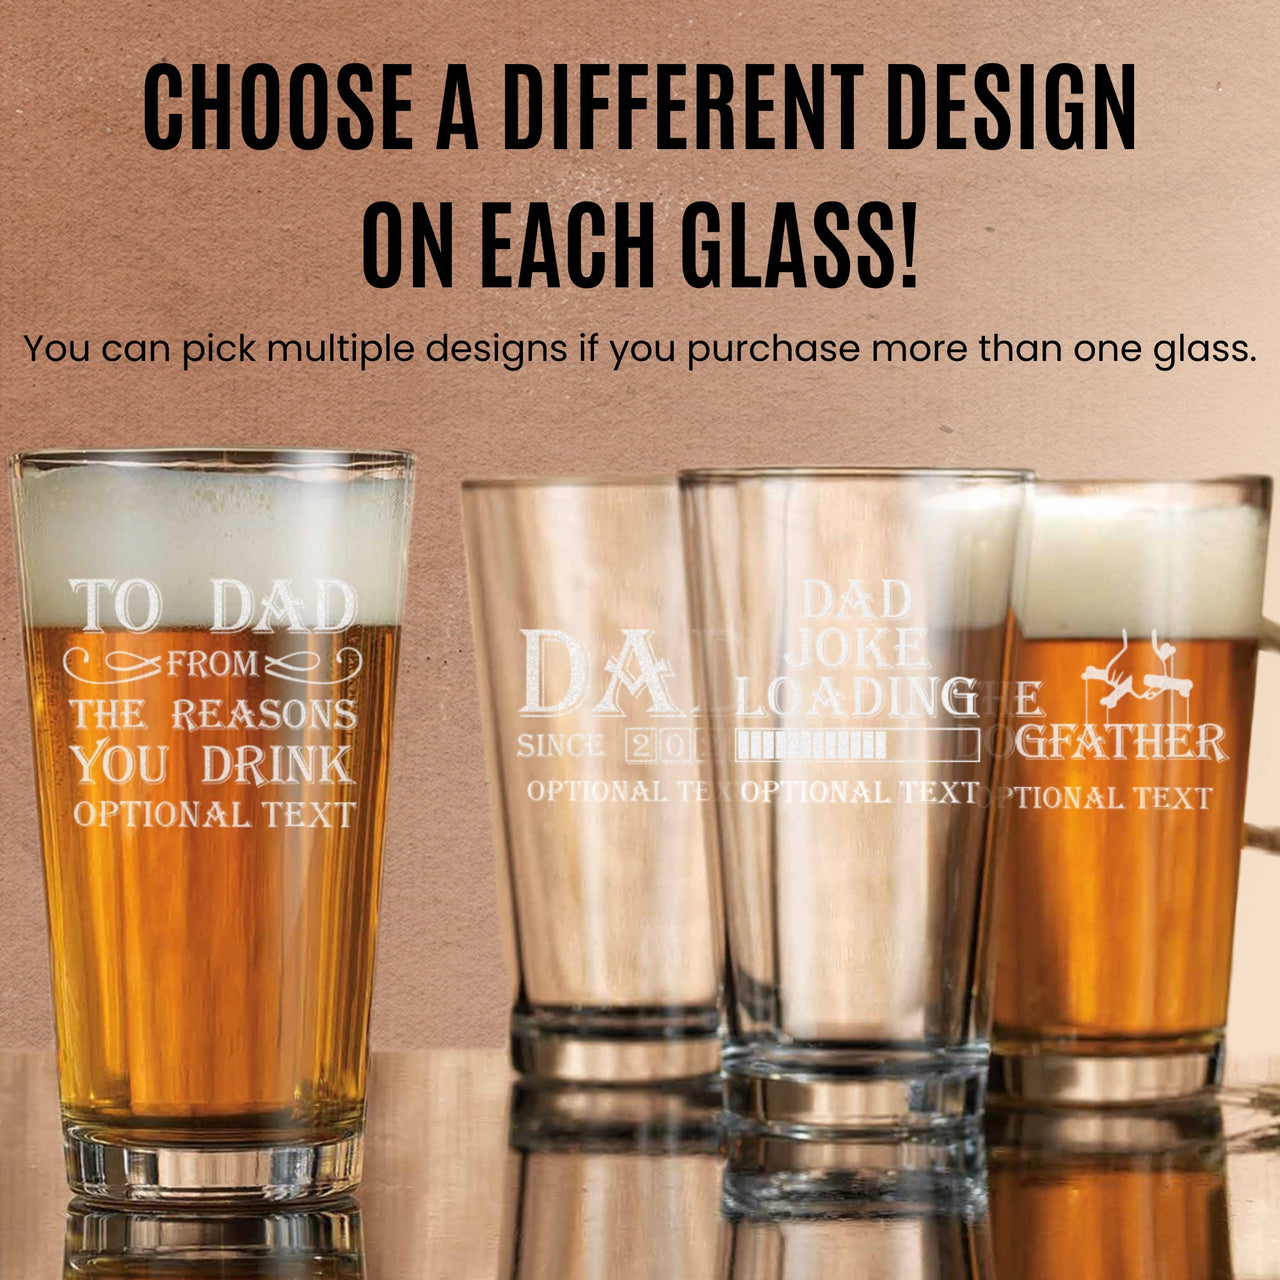 Call Me Old Fashioned Engraved Beer Glass